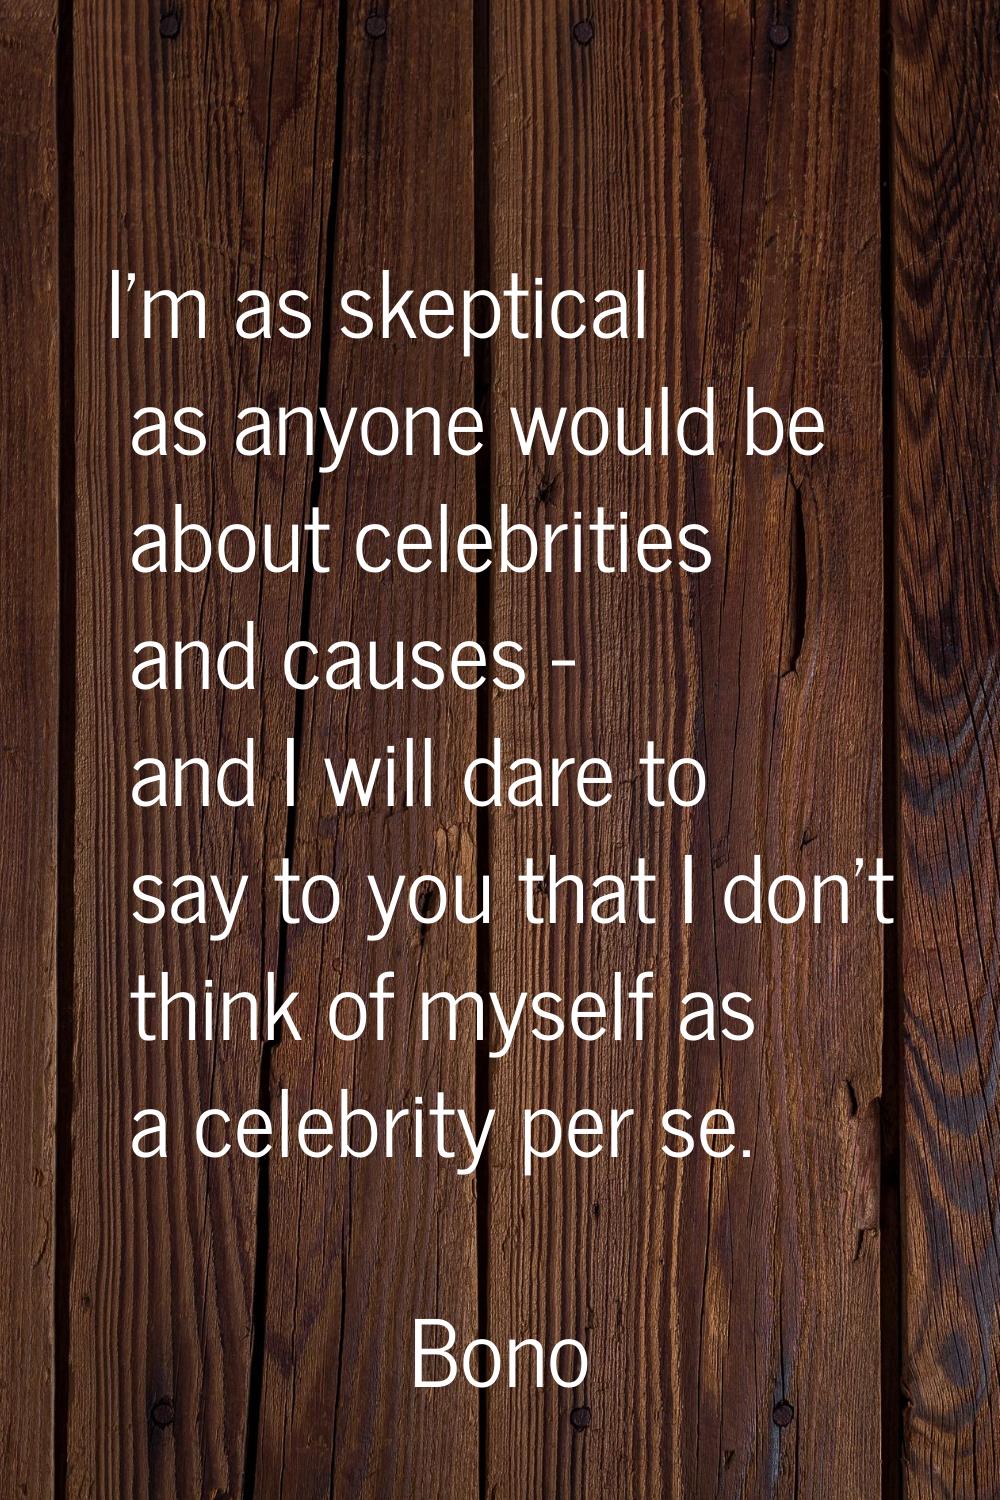 I'm as skeptical as anyone would be about celebrities and causes - and I will dare to say to you th